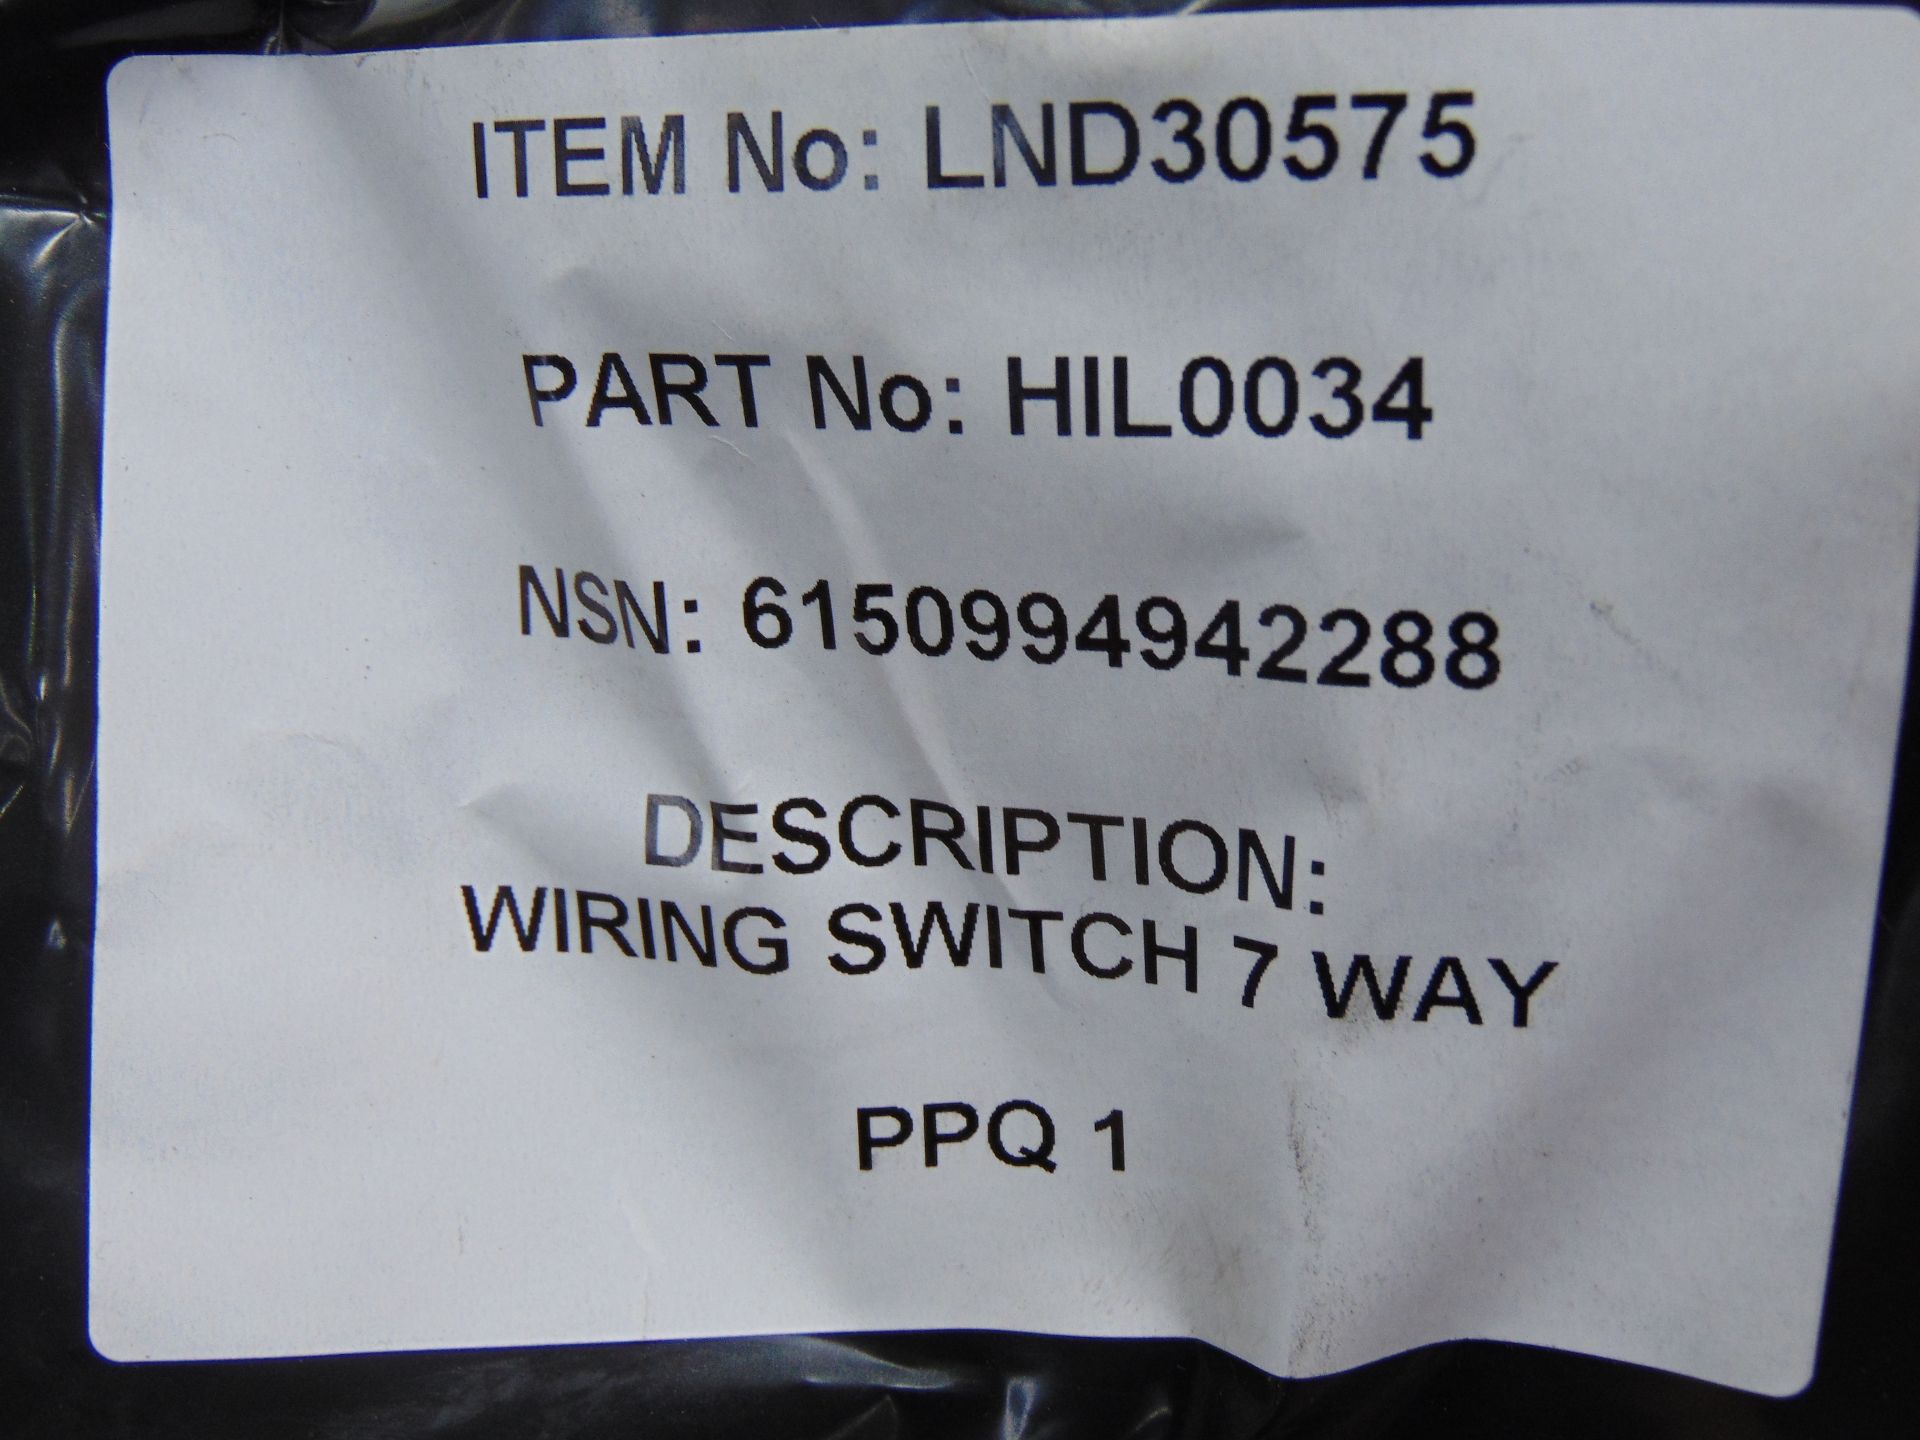 30 x 7 Way Wiring Switches - Image 5 of 5